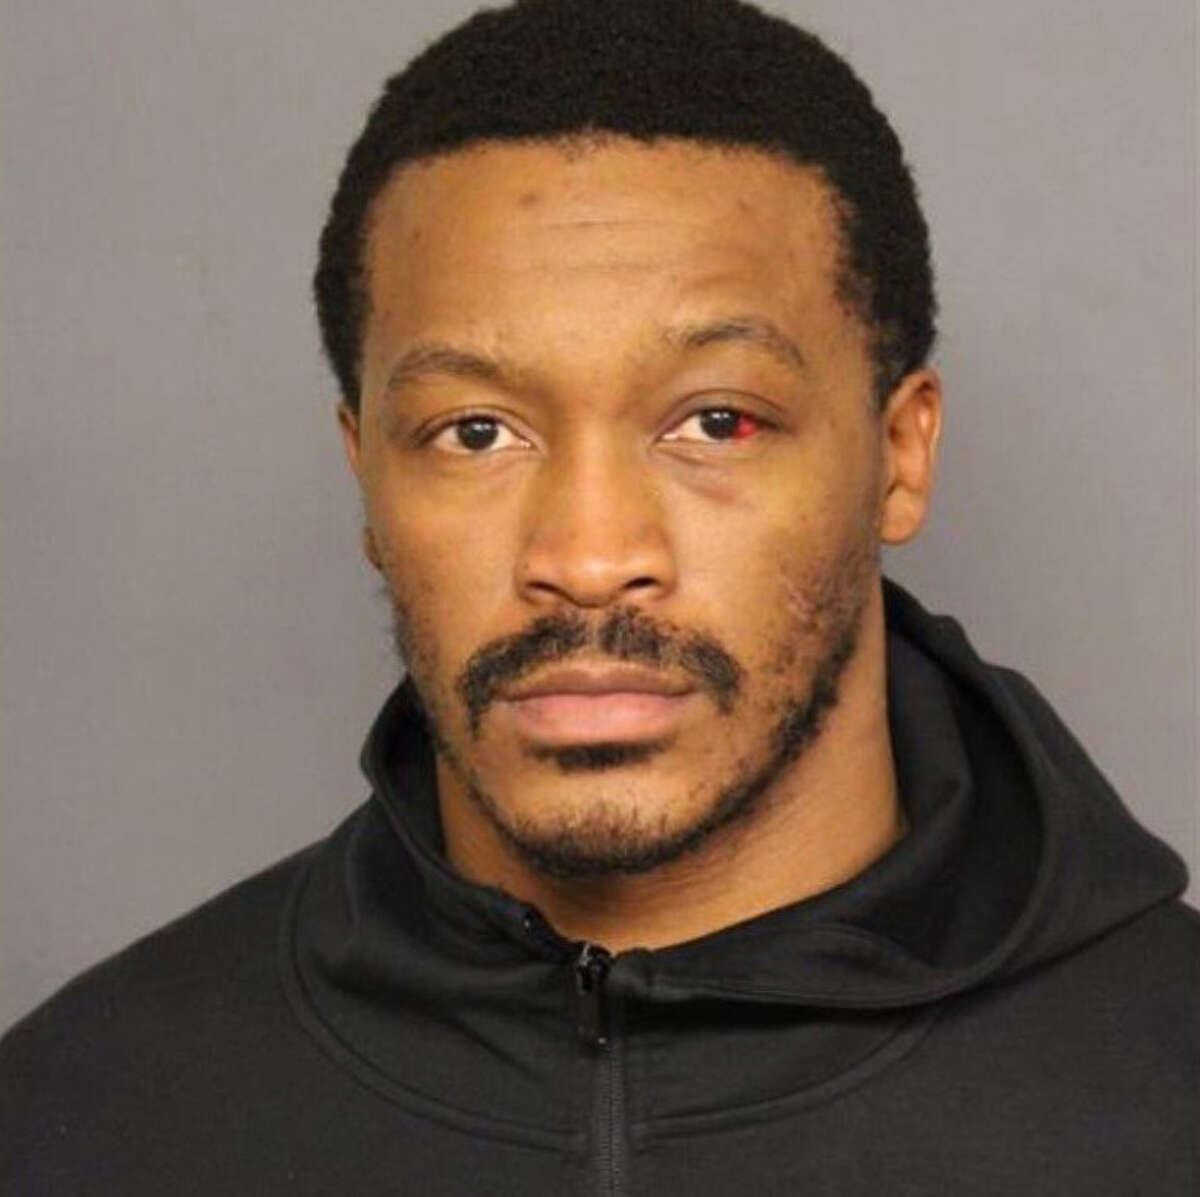 PHOTOS: Demaryius Thomas' time with the Texans A mugshot provided by the Denver Police Department after Demaryius Thomas was arrested and charged with vehicular assault on Feb. 27, 2019.